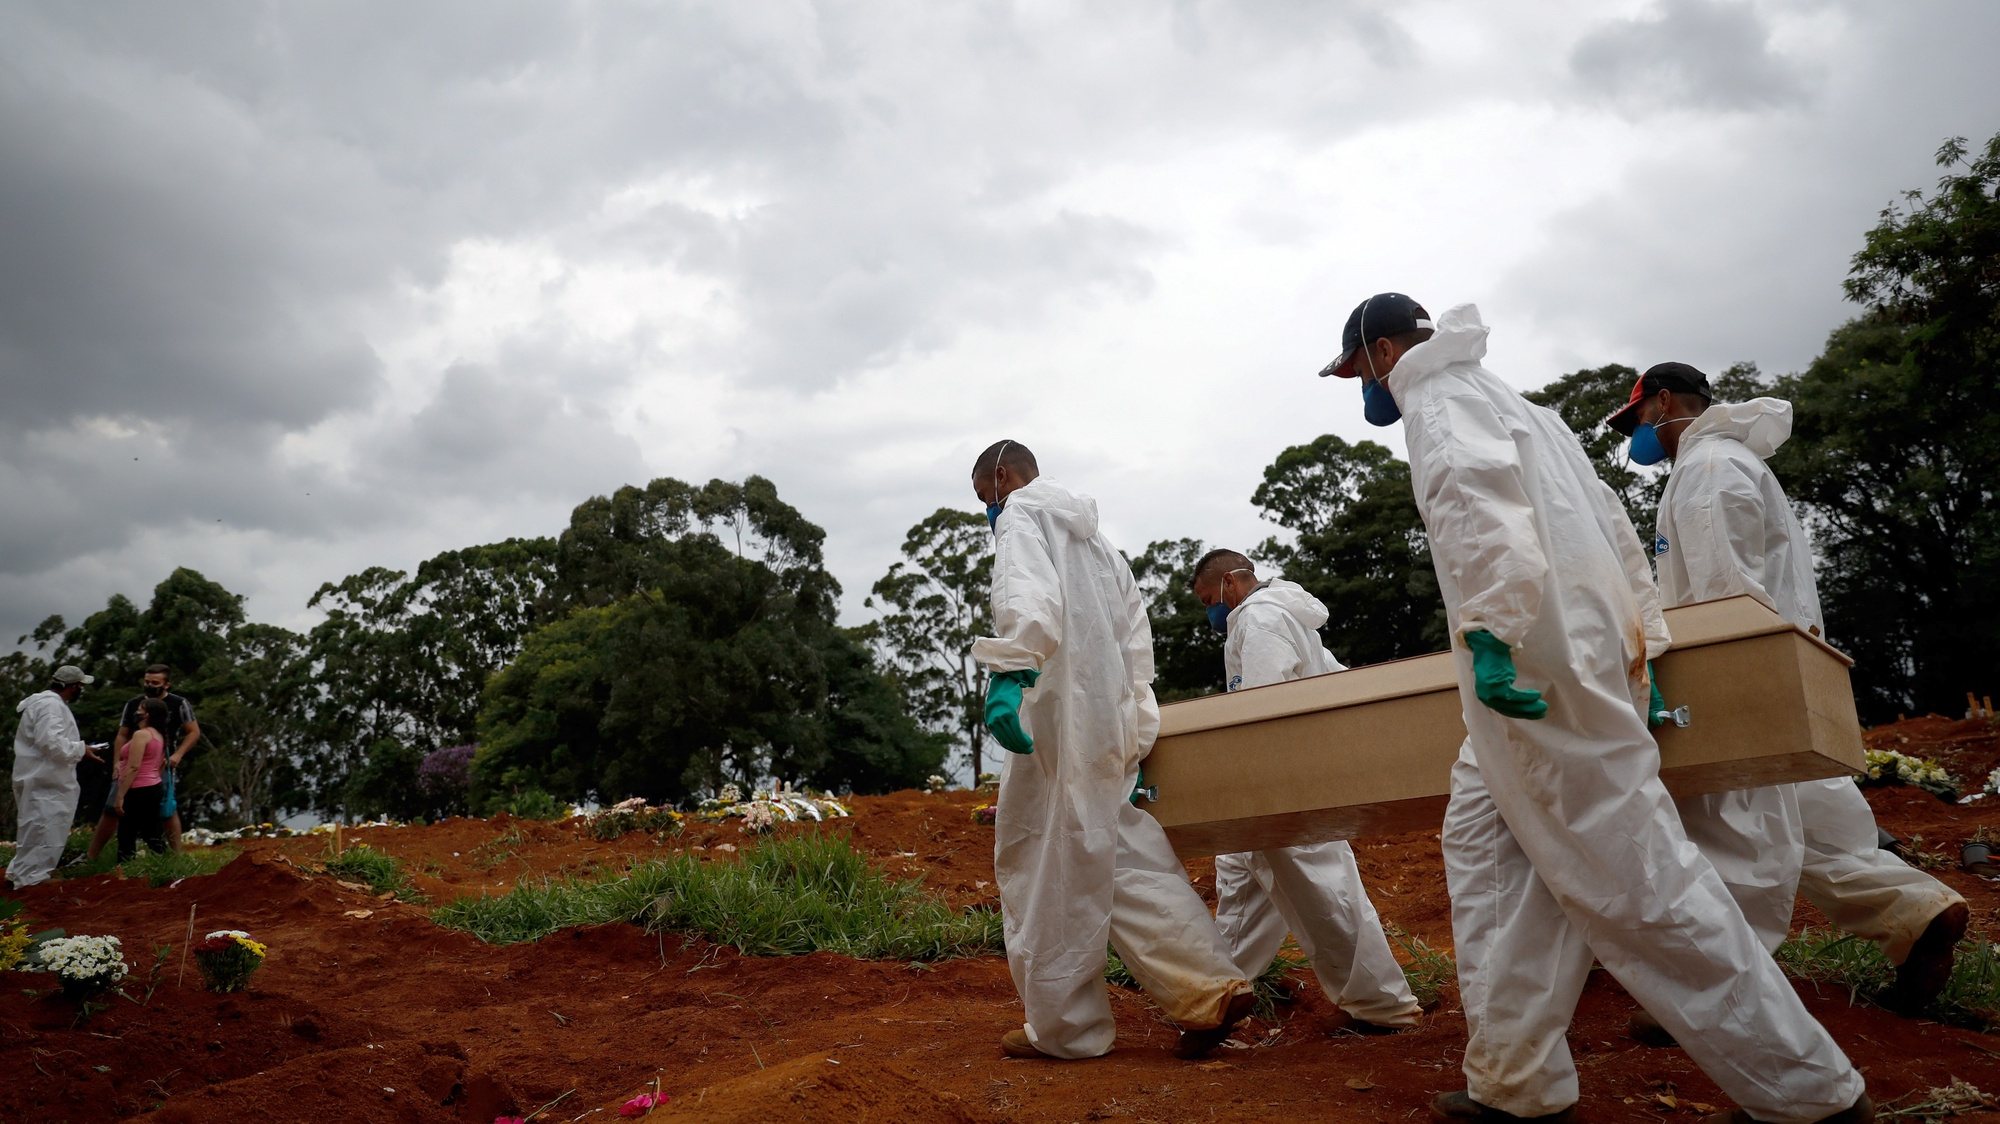 epa09052686 Burial of a victim of covid-19 at the Viola Formosa cemetery in Sao Paulo, Brazil, 04 March 2021. Brazil, one of the countries most affected by the pandemic in the world, registered 1,699 deaths from covid-19 in the last 24 hours, which is equivalent to one death every 50 seconds, the Government reported on 04 March.  EPA/Fernando Bizerra Jr